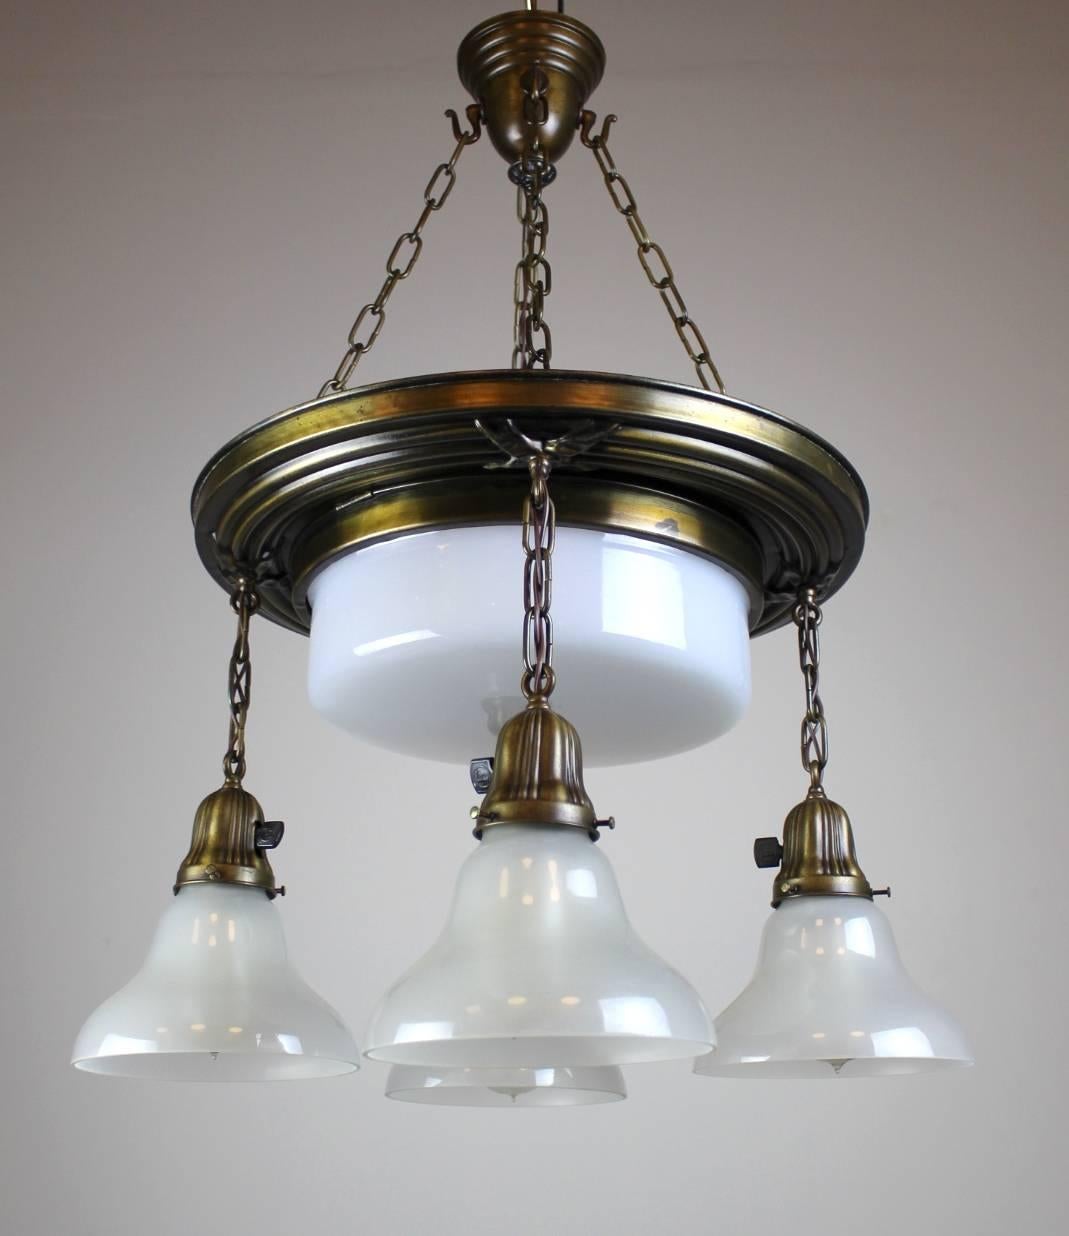 Impressive five light (four light + centre bowl) shower fixture.

Classical Revival Style, with Reed & Ribbon design + Sheffield Holders,

circa 1915, finished in a dark brass with highlights.

Meas: 31